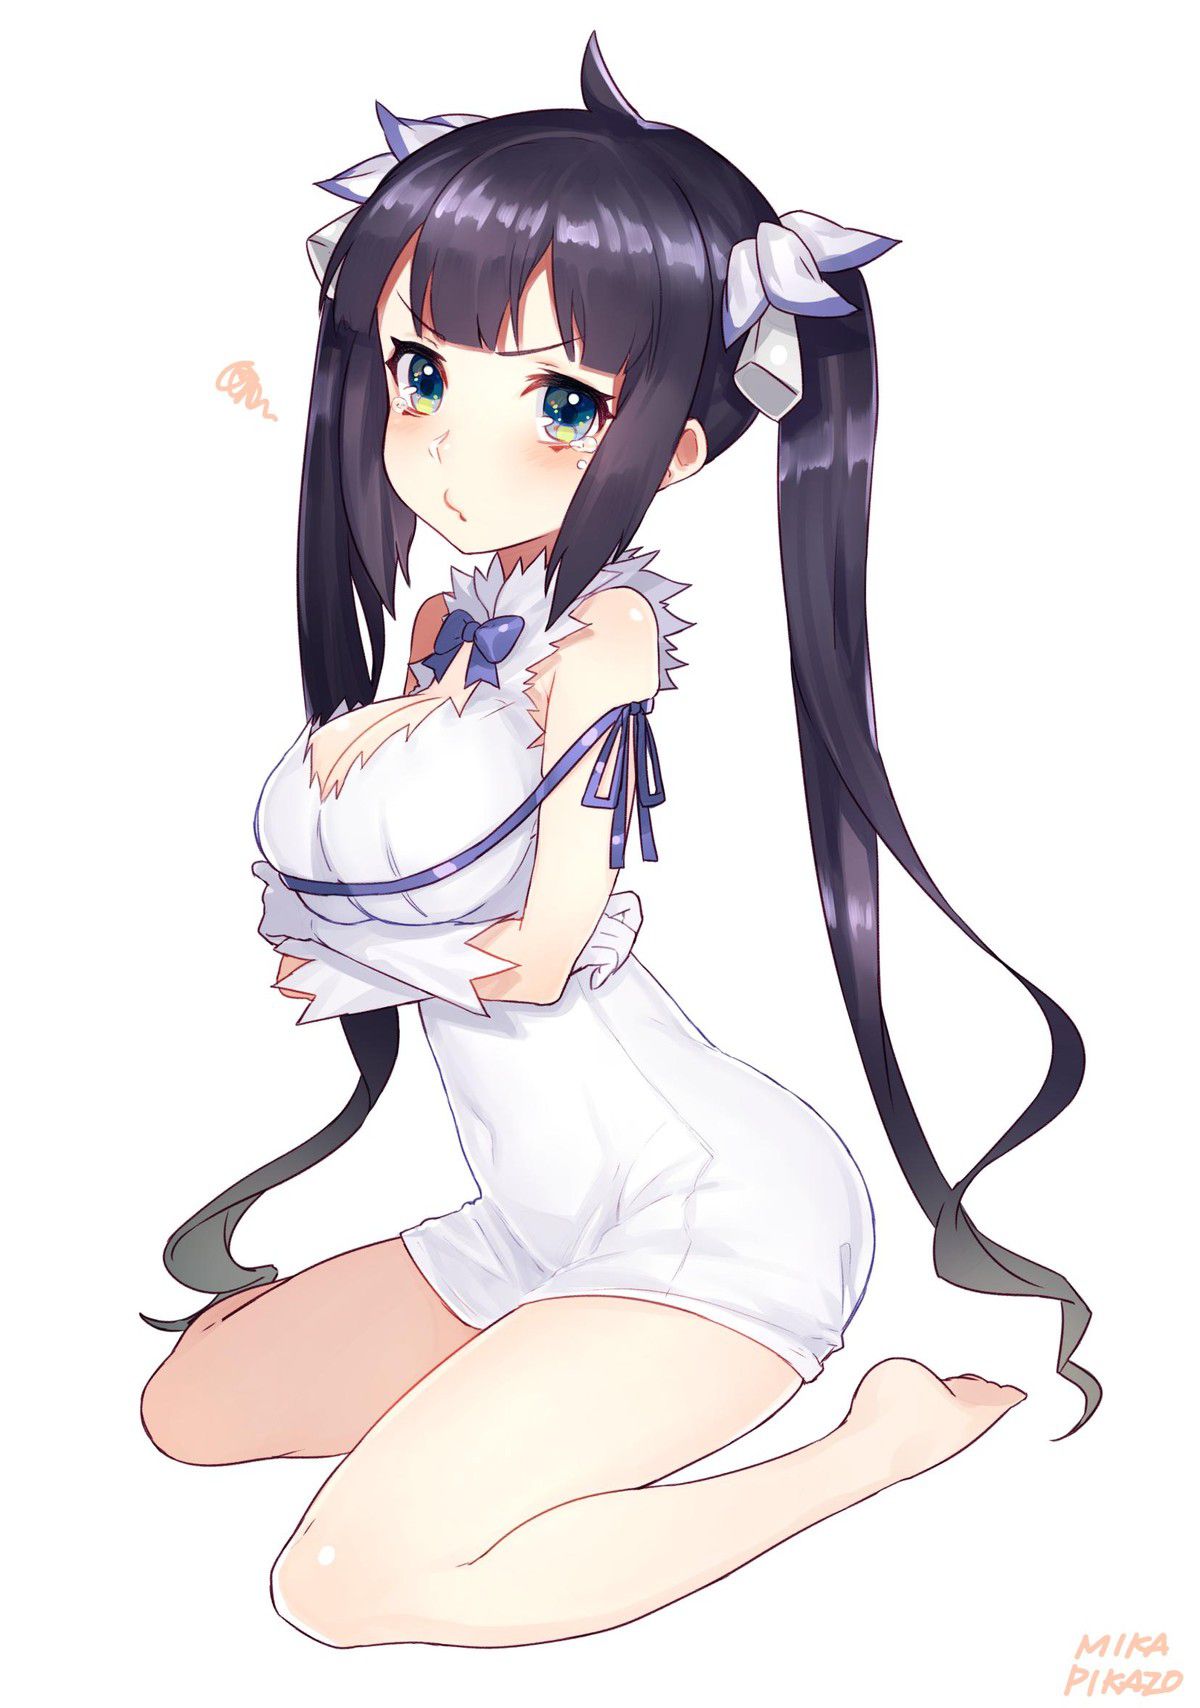 [Image] "Dan town ' to hshs in Hestia: Elo not illustrations of the www 15